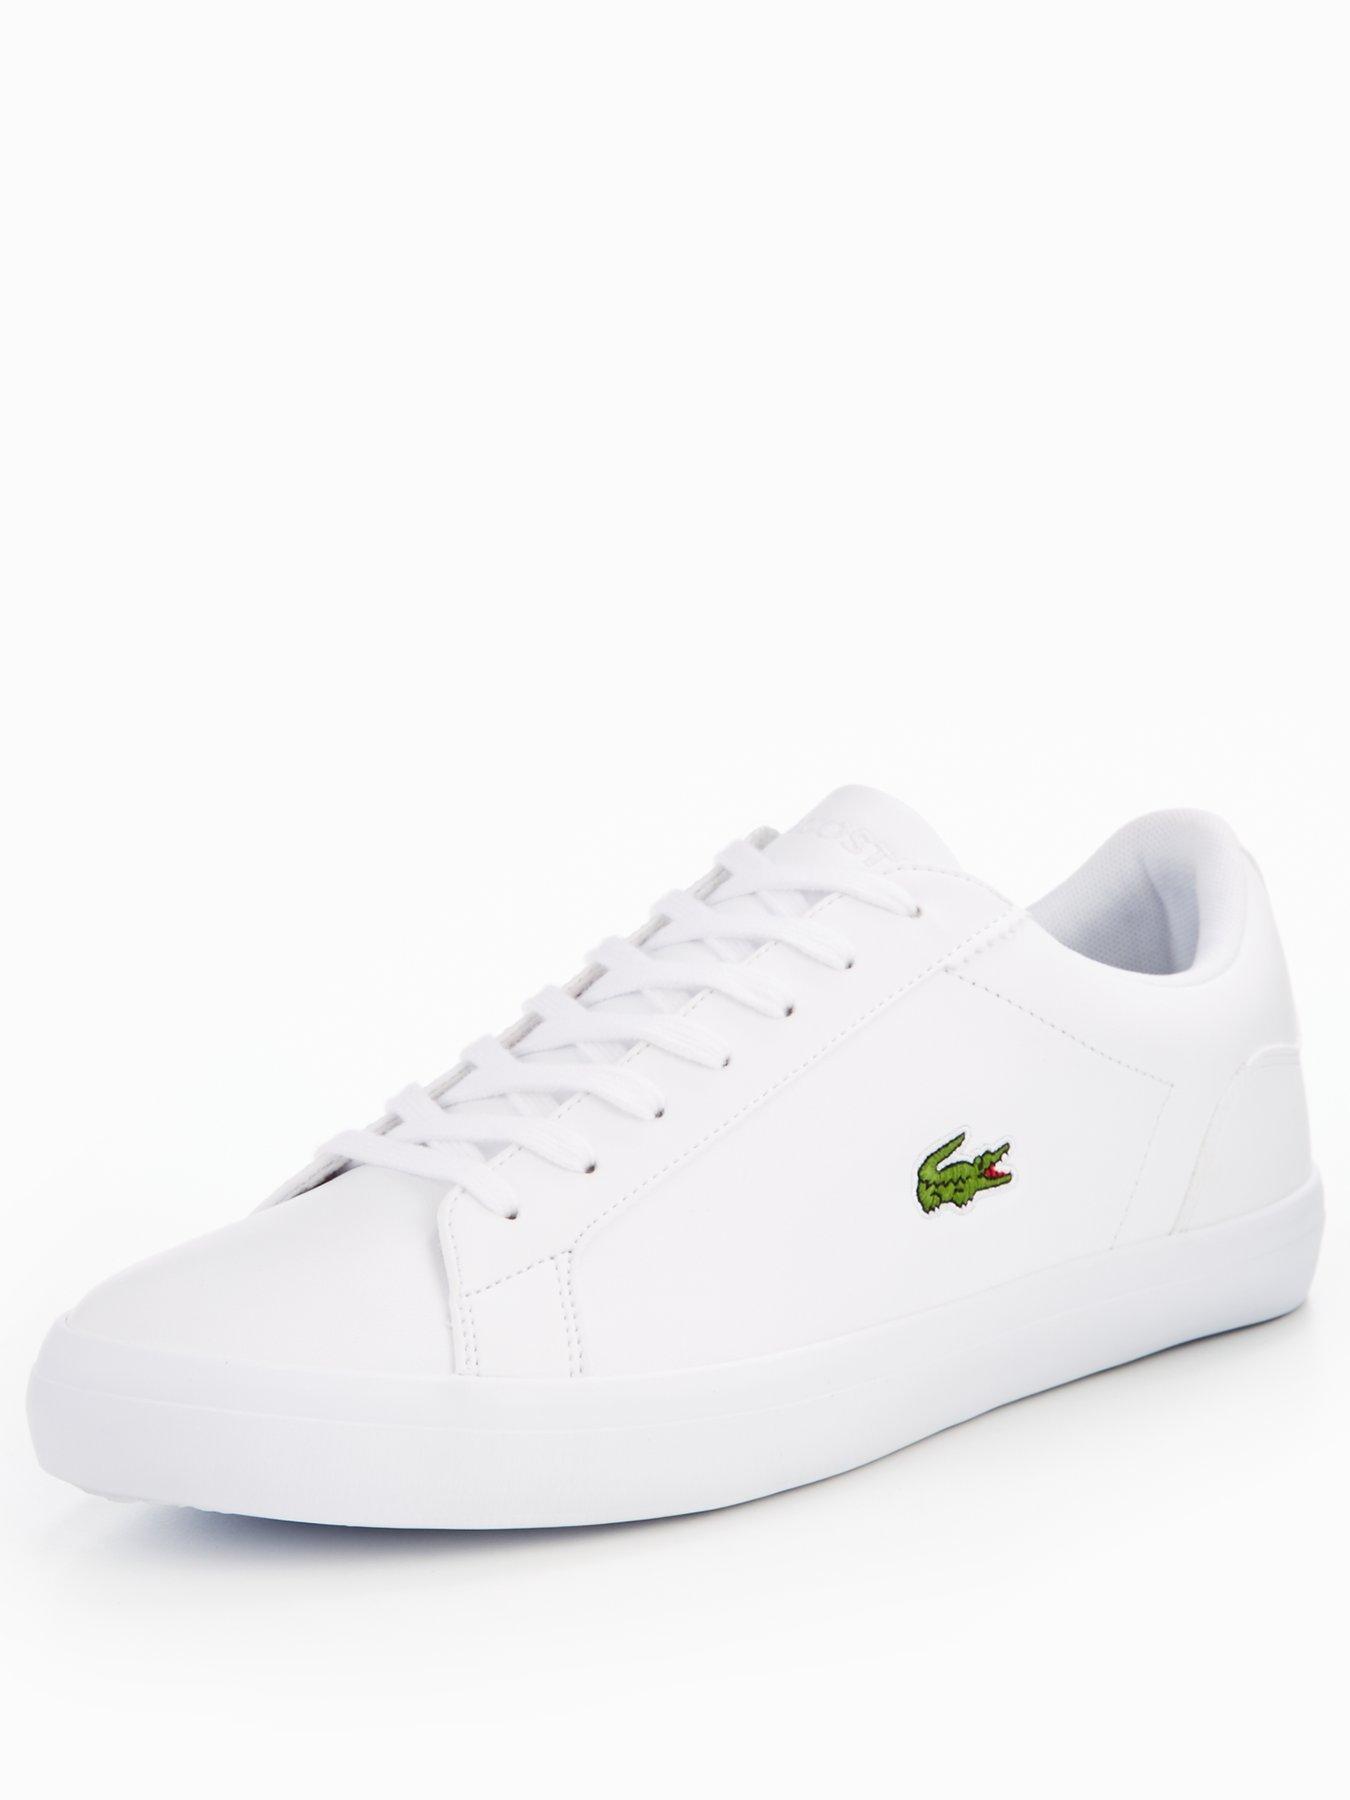 lacoste trainers ireland Cheaper Than 